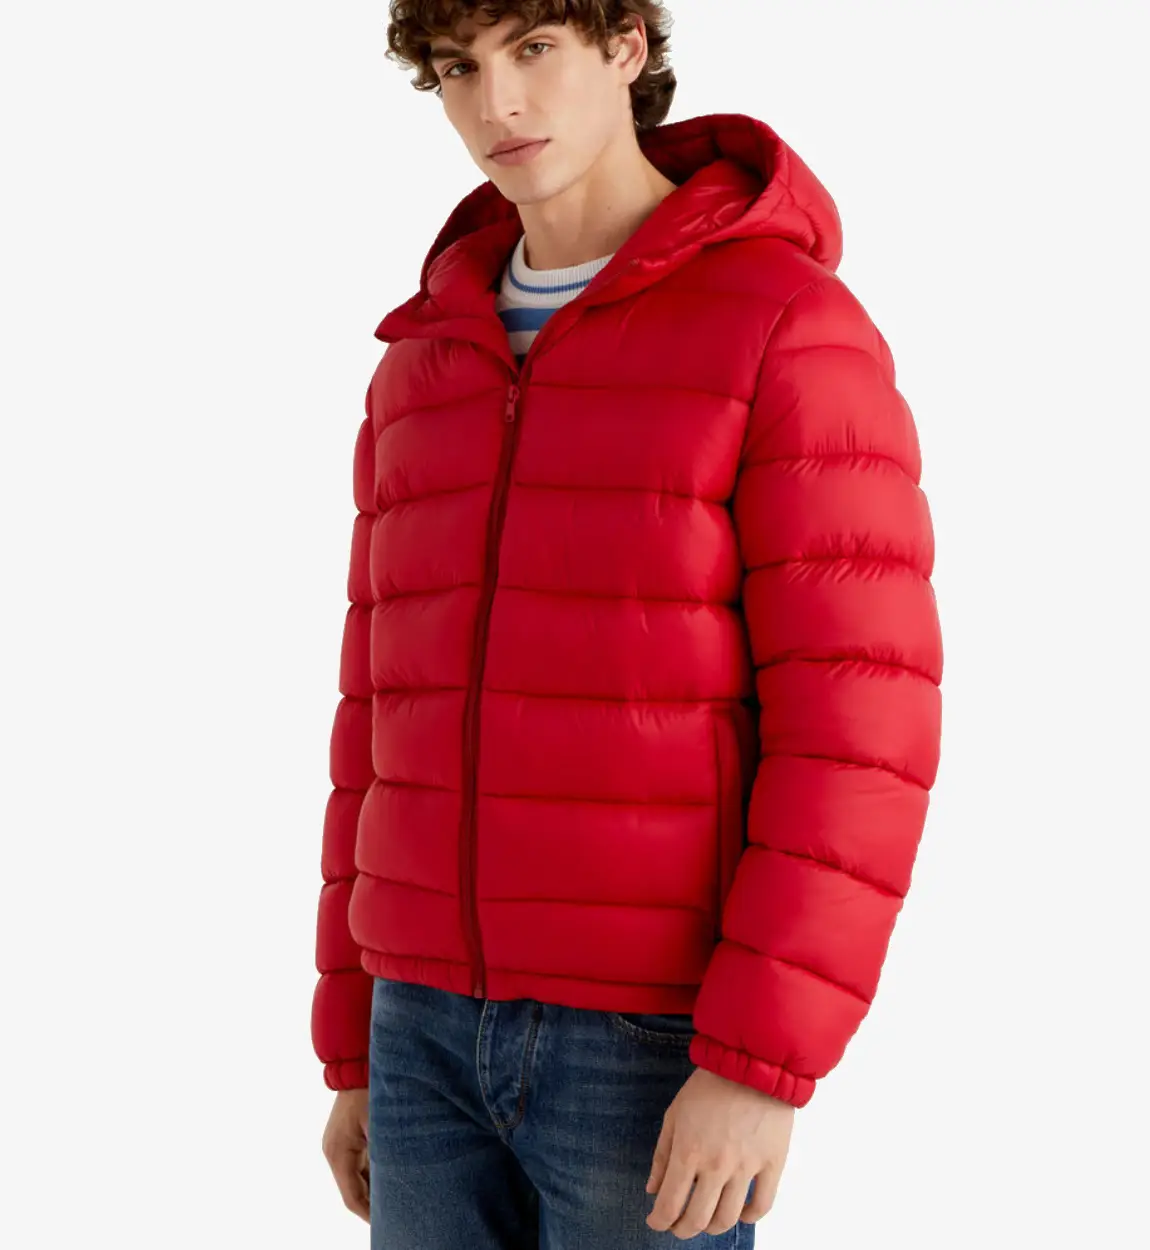 Red_Puffer_Jacket_Tendon_Sports